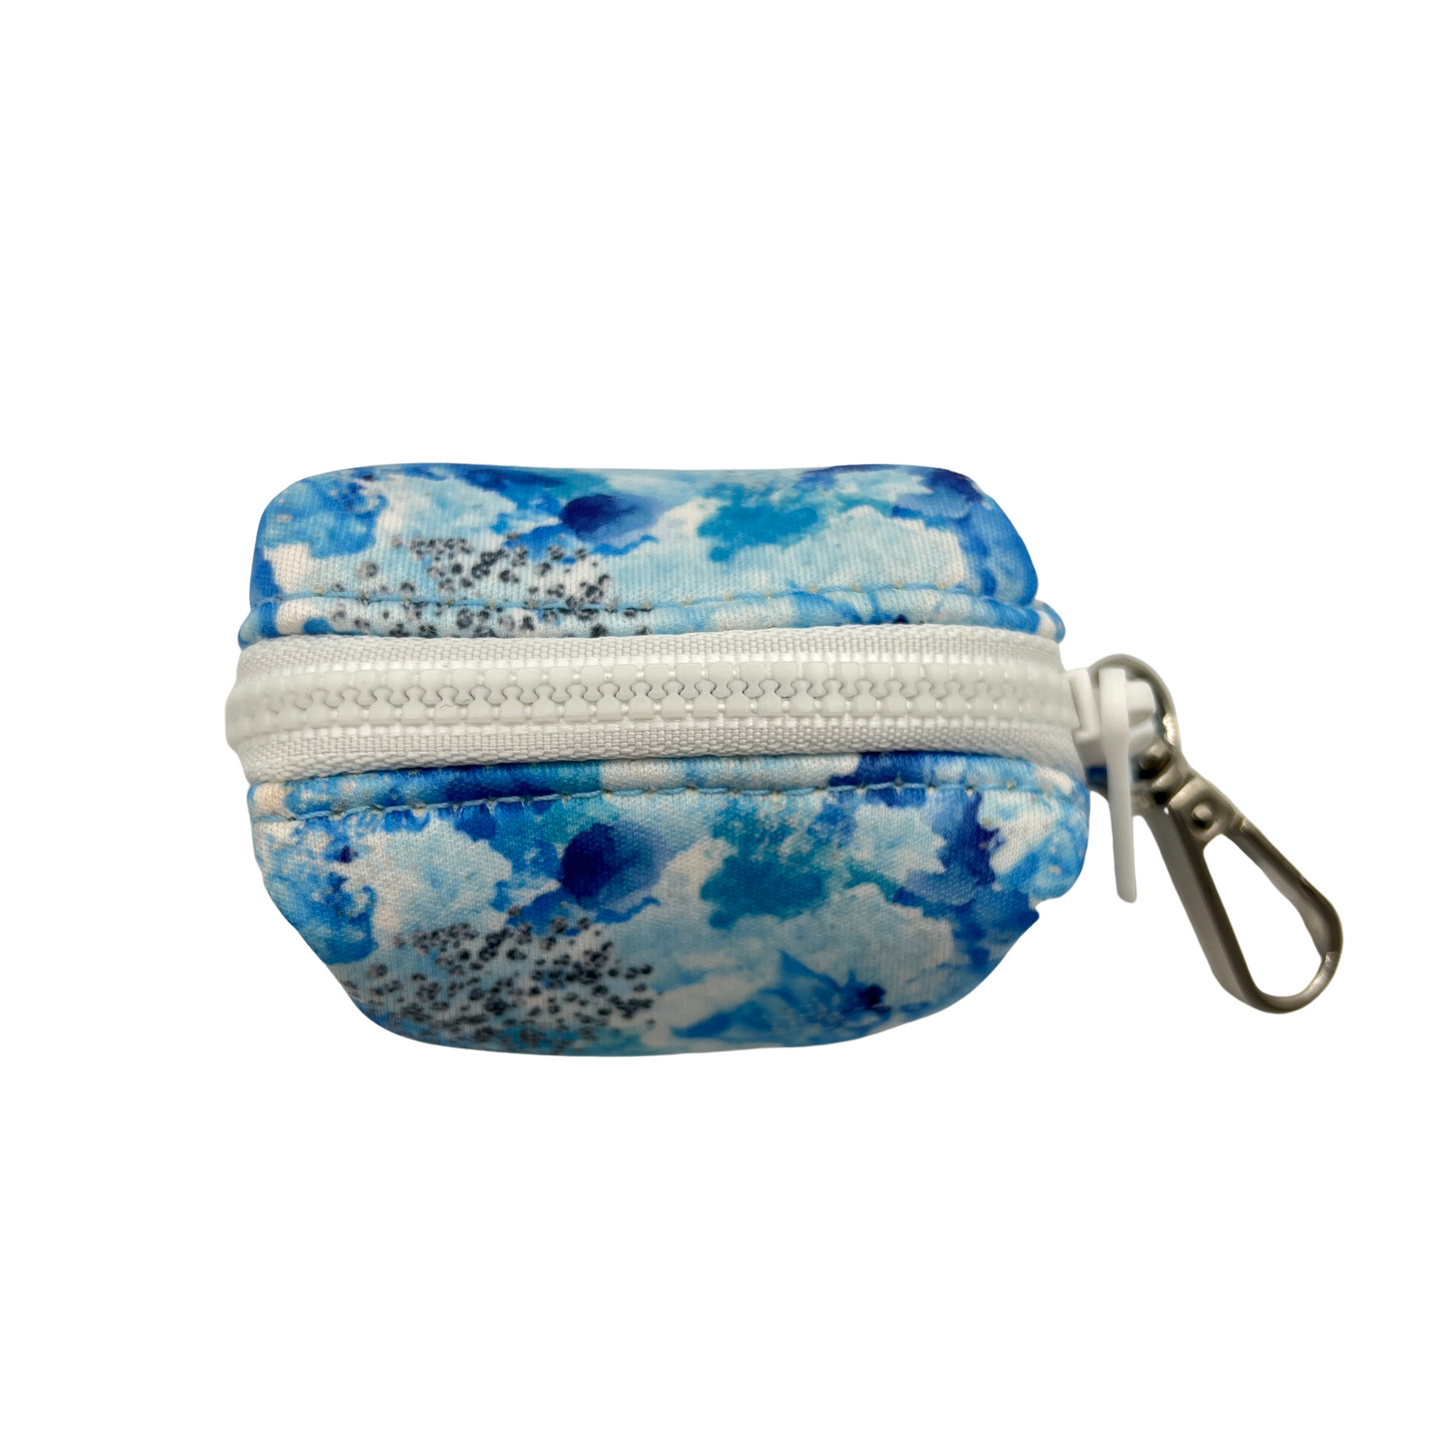 <tc>Poop bag holder "In the Clouds"</tc>